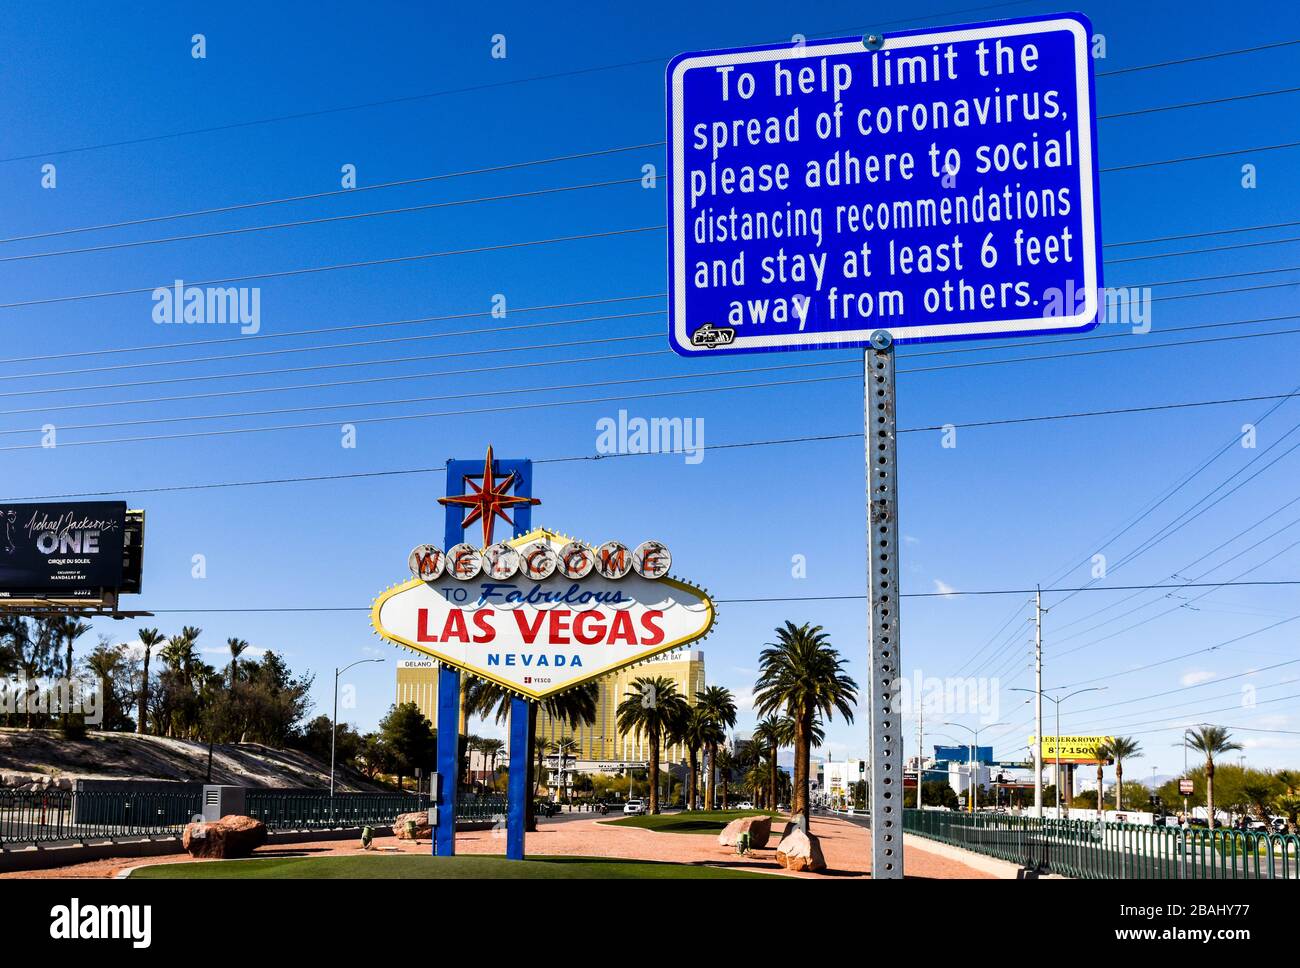 A Social Distancing sign near the iconic Welcome to Las Vegas Sign. One week into the Las Vegas shut down due to Coronavirus, the Strip is fairly empty. Most residents seem to be heeding Governor Sisolak’s request you “Stay home for Nevada” with evidence of throughout Clark County, NV. The Empty Streets of Las Vegas Near Welcome to Las Vegas Sign on Las Vegas Blvd. Photo Credit: Ken Howard/Alamy Stock Photo